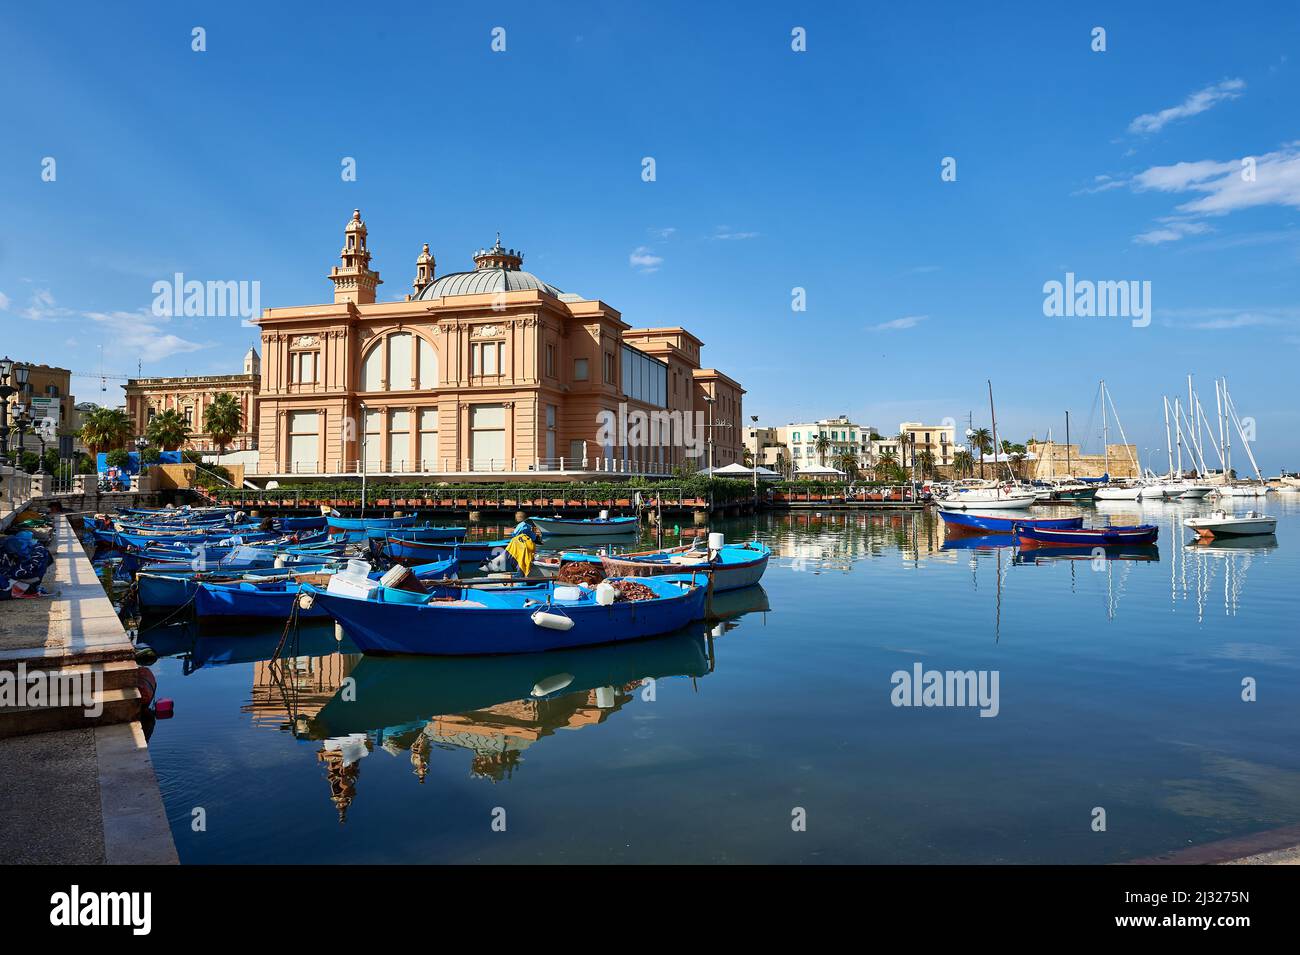 View of the Museo Teatro Margherita, Art Nouveau building, formerly a cinema and theater now a contemporary art exhibition venue, Bari, Italy, Europe Stock Photo